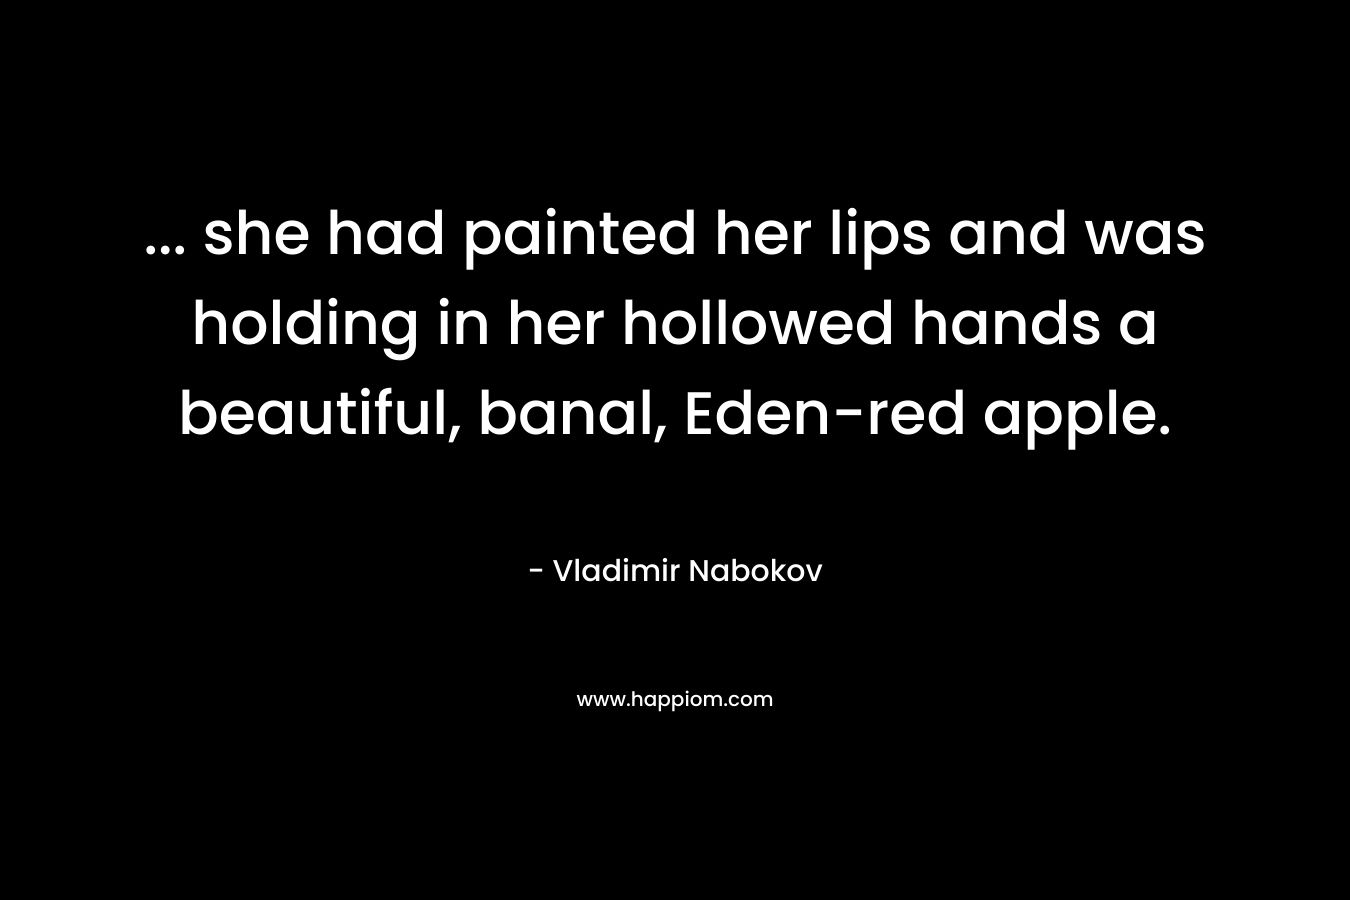 ... she had painted her lips and was holding in her hollowed hands a beautiful, banal, Eden-red apple.